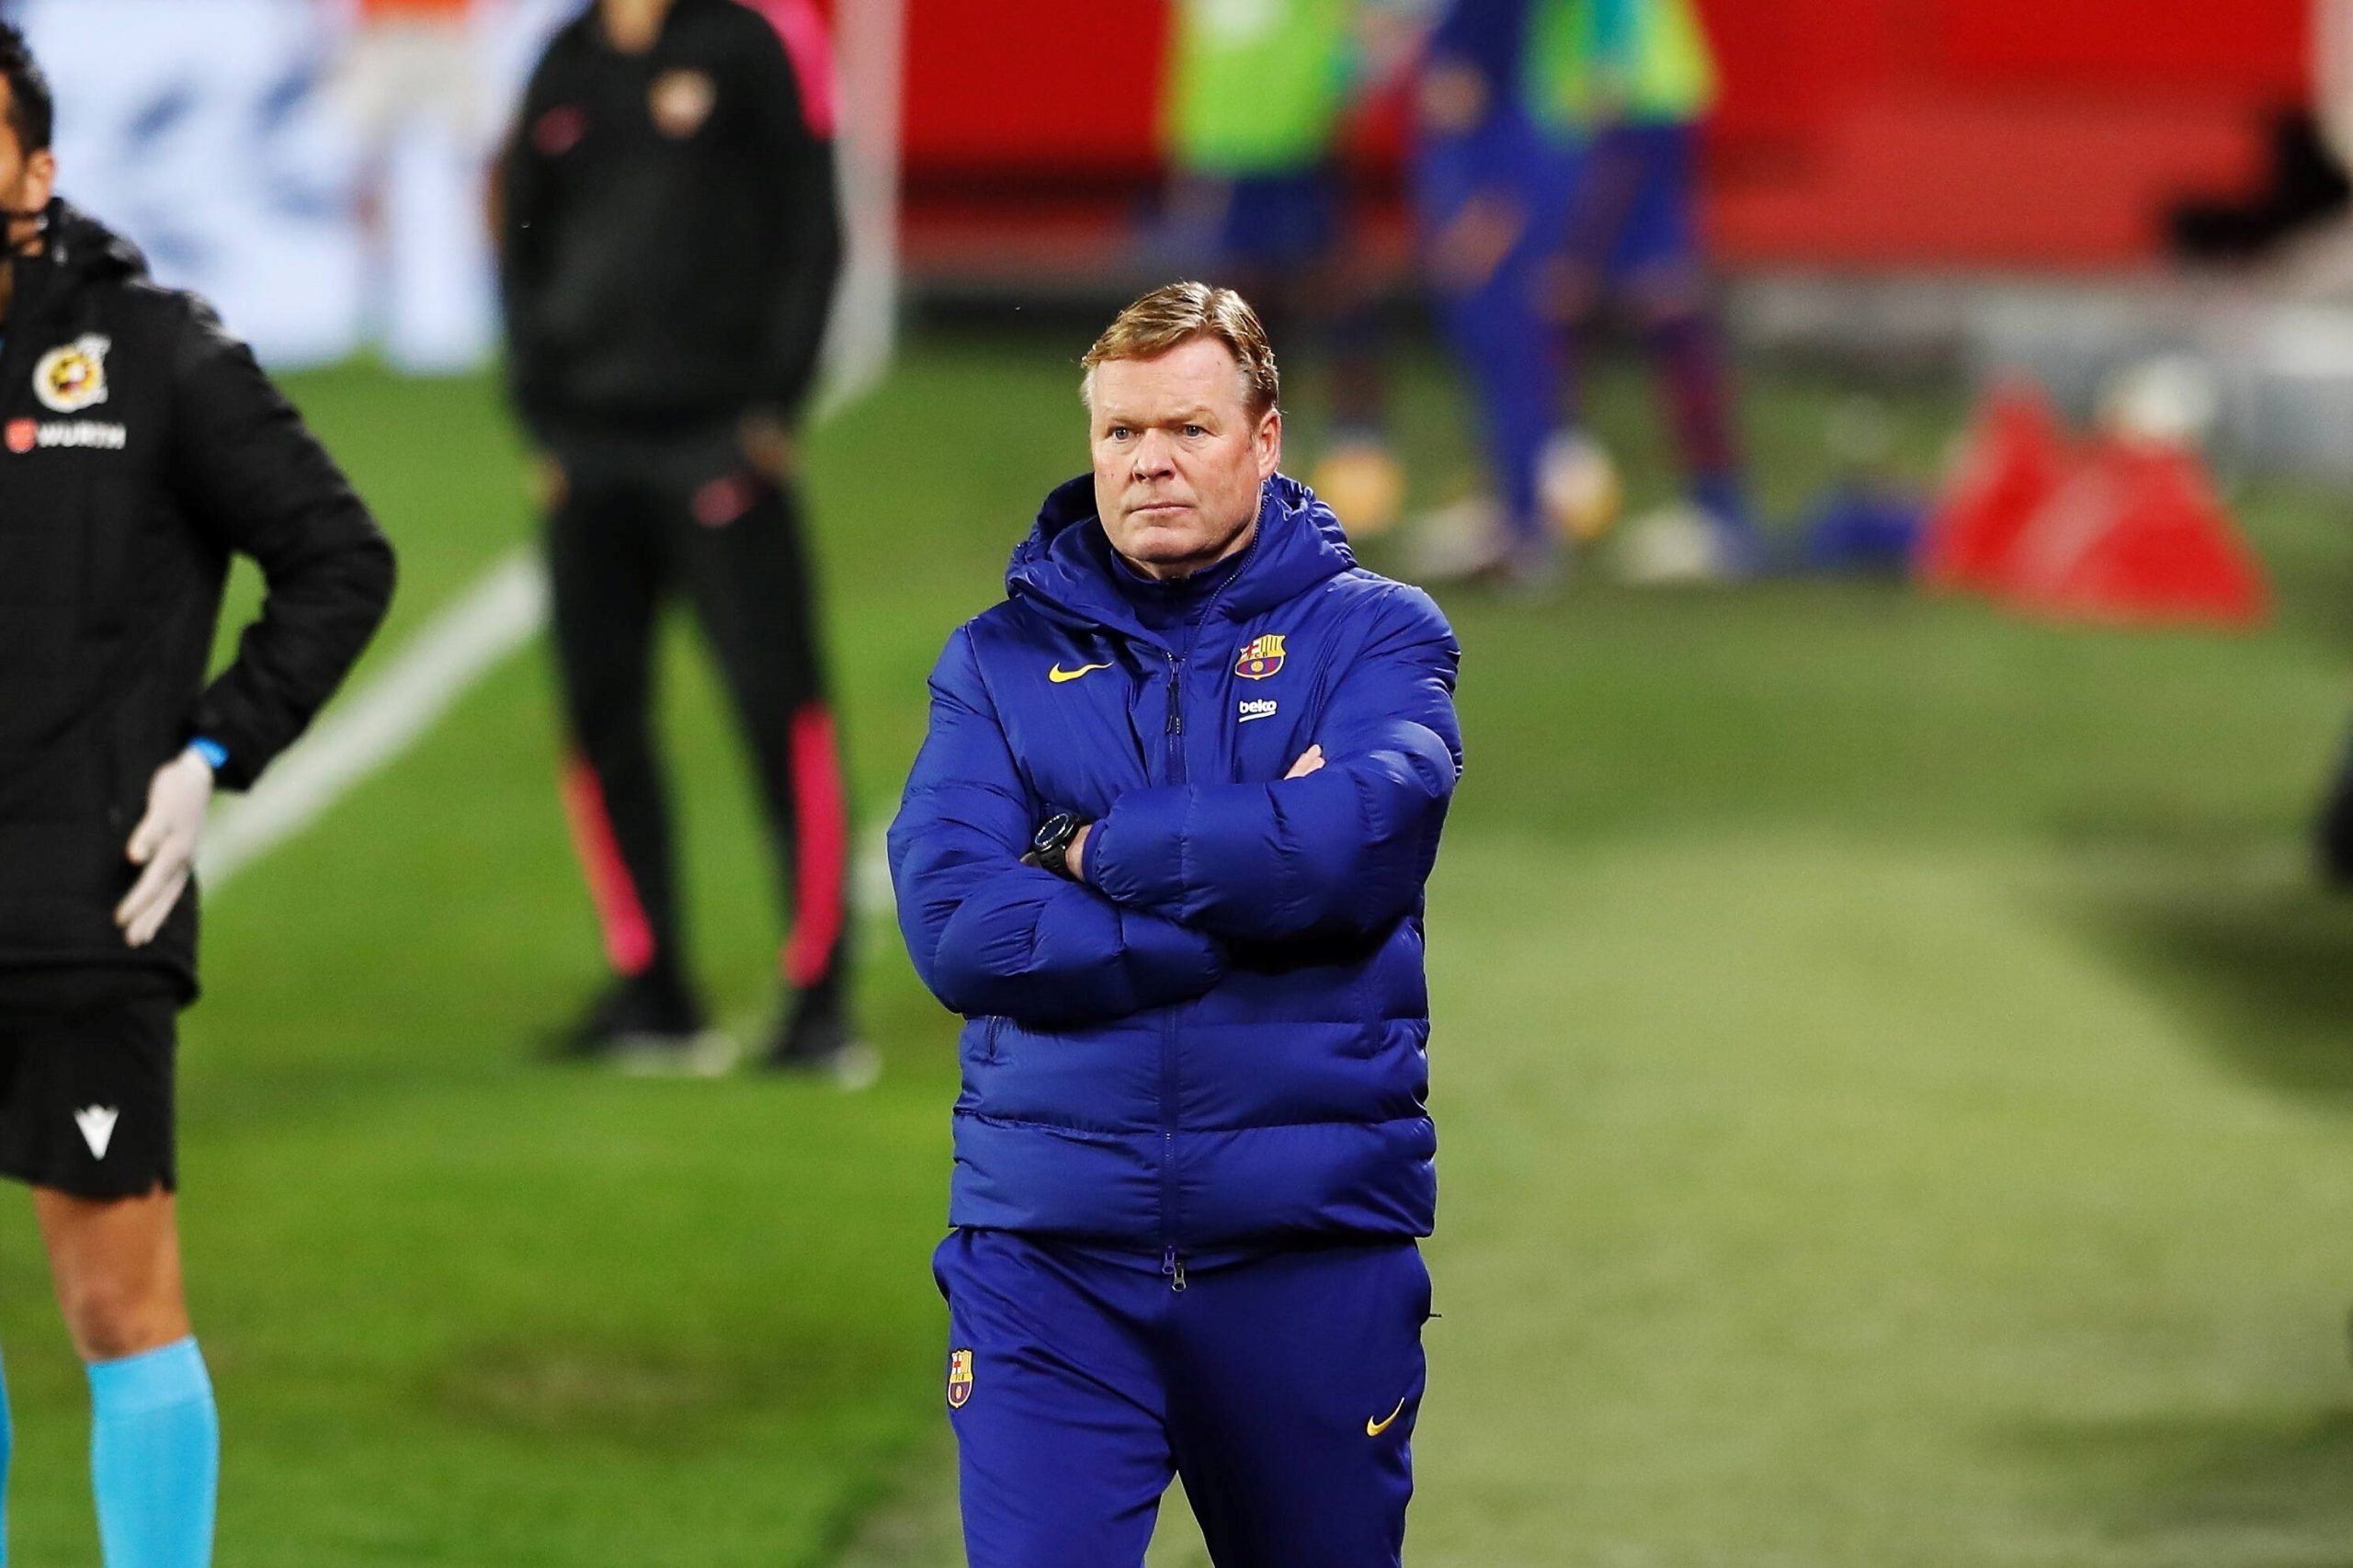 Barca changed the board but still slanders its own men: Koeman denies claims he was hospitalized due to anxiety